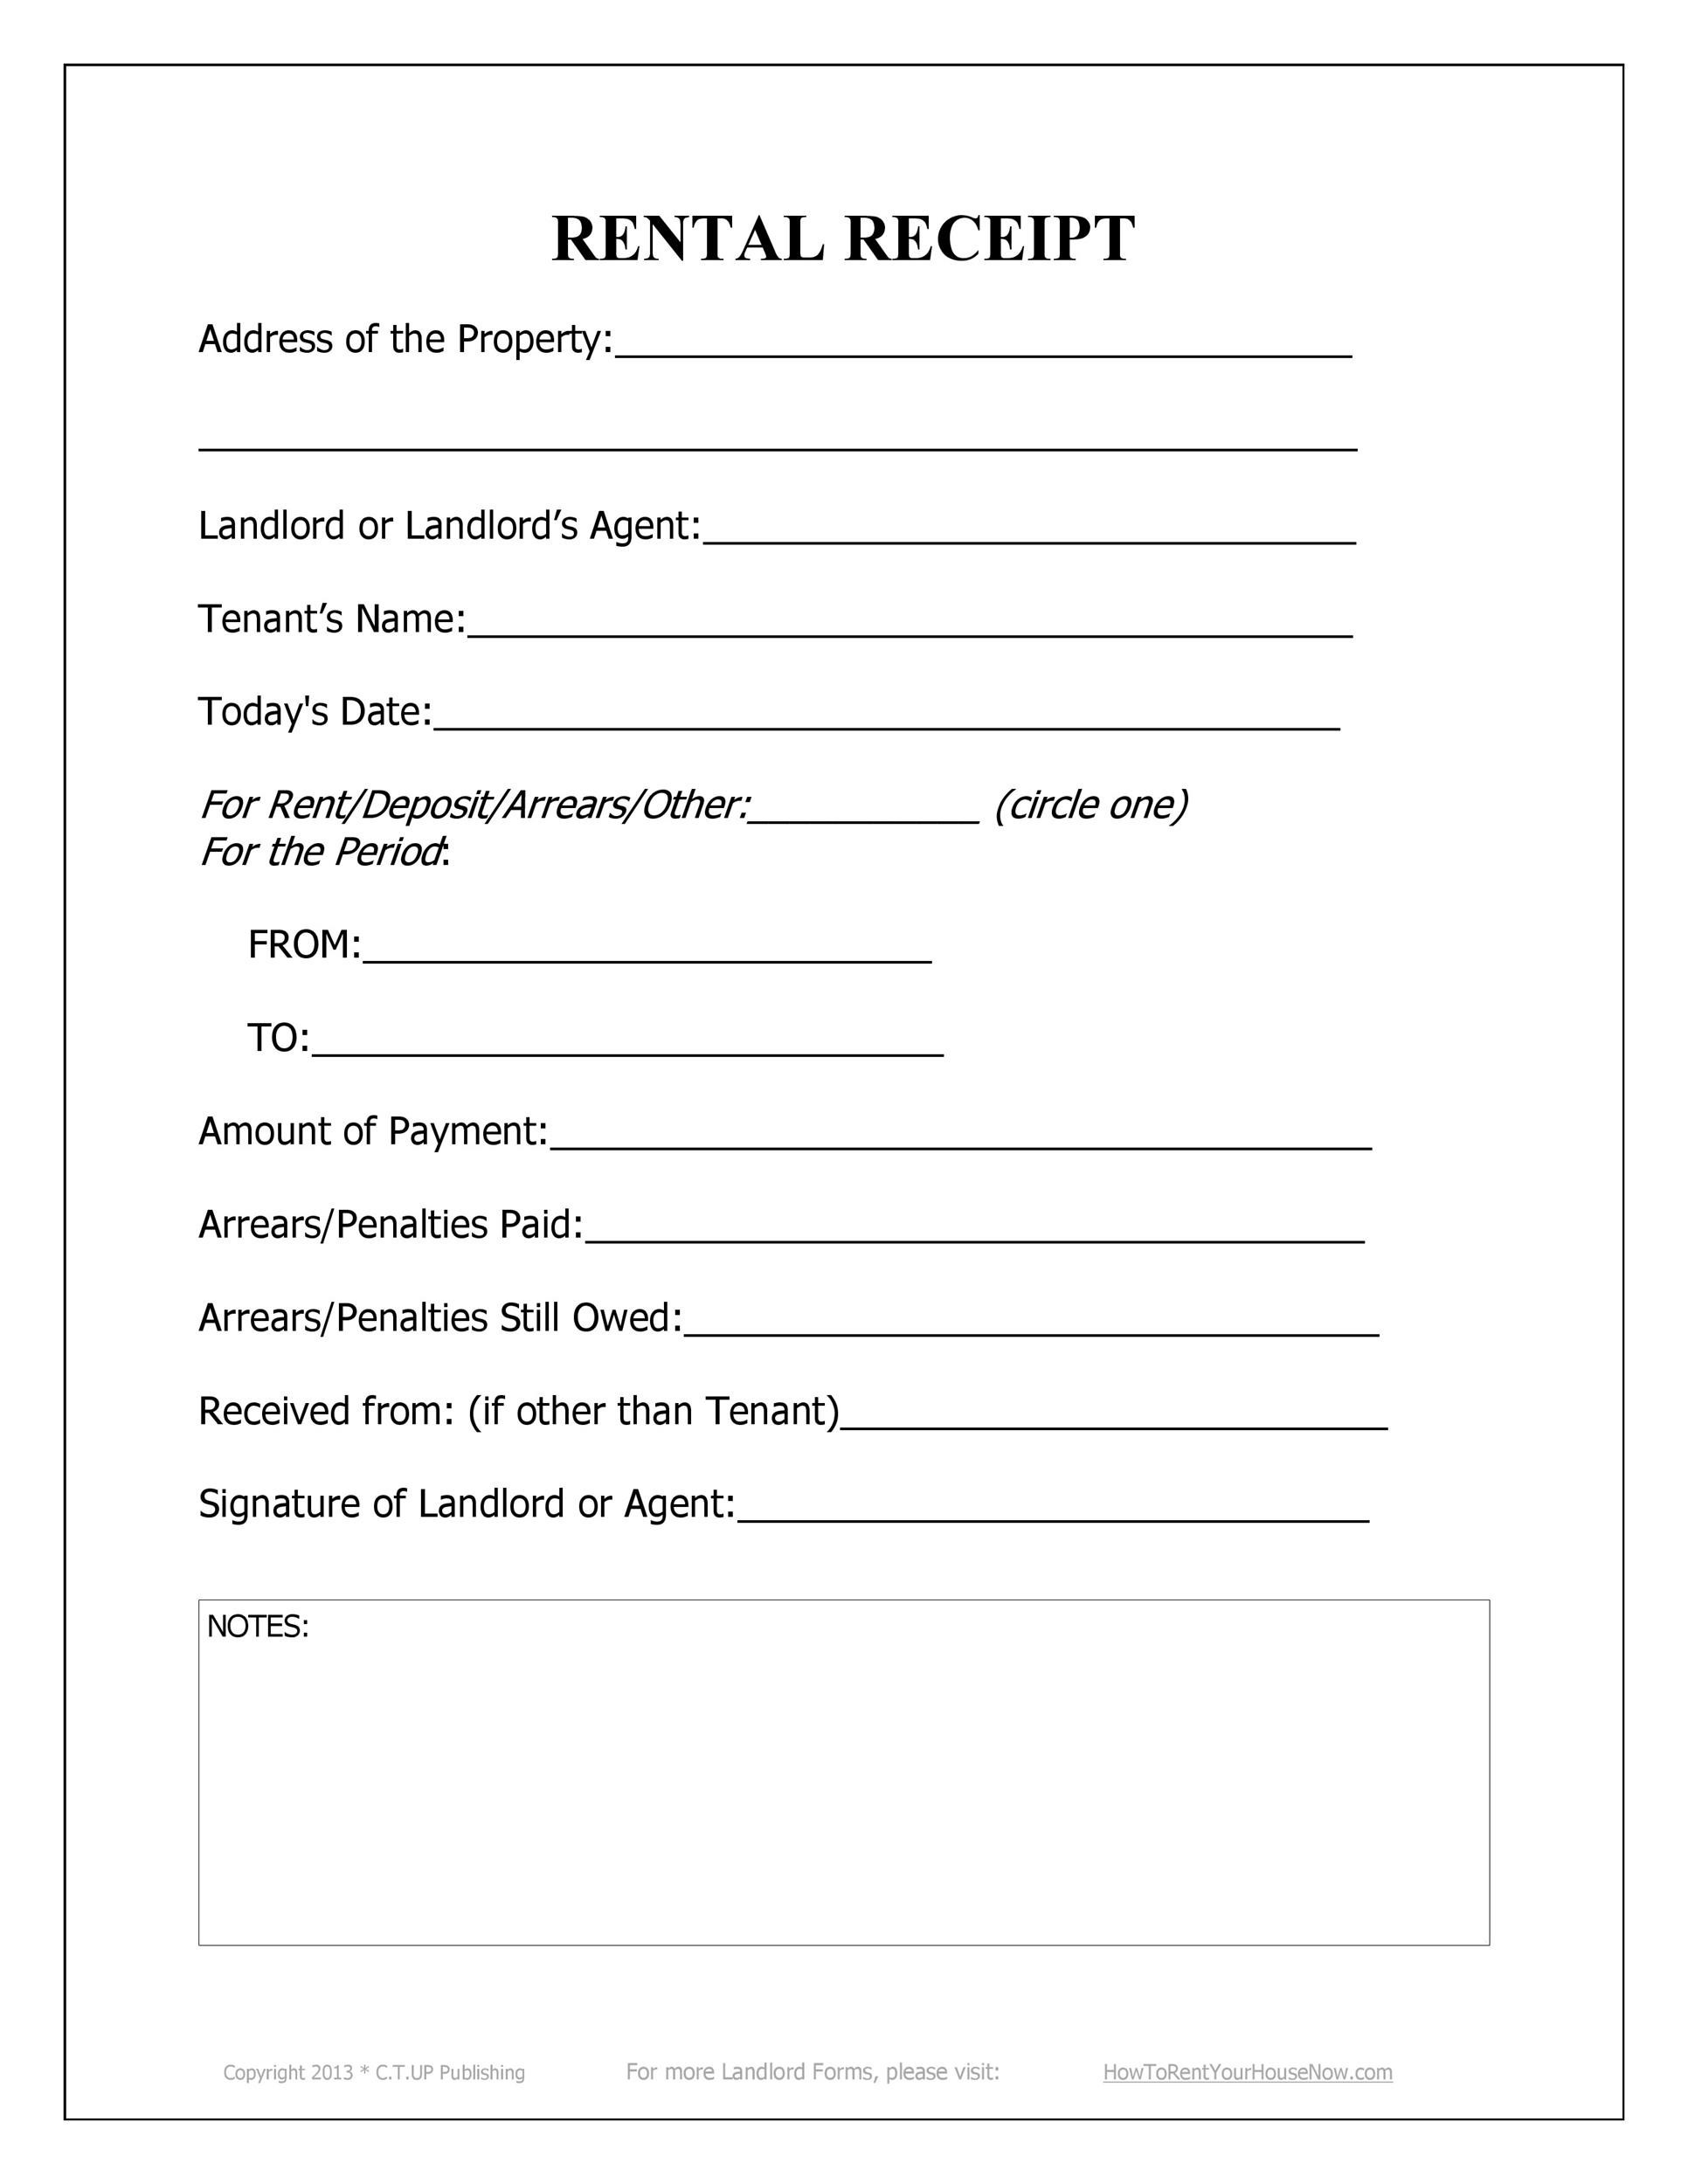 working-tax-credit-form-editable-pdf-forms